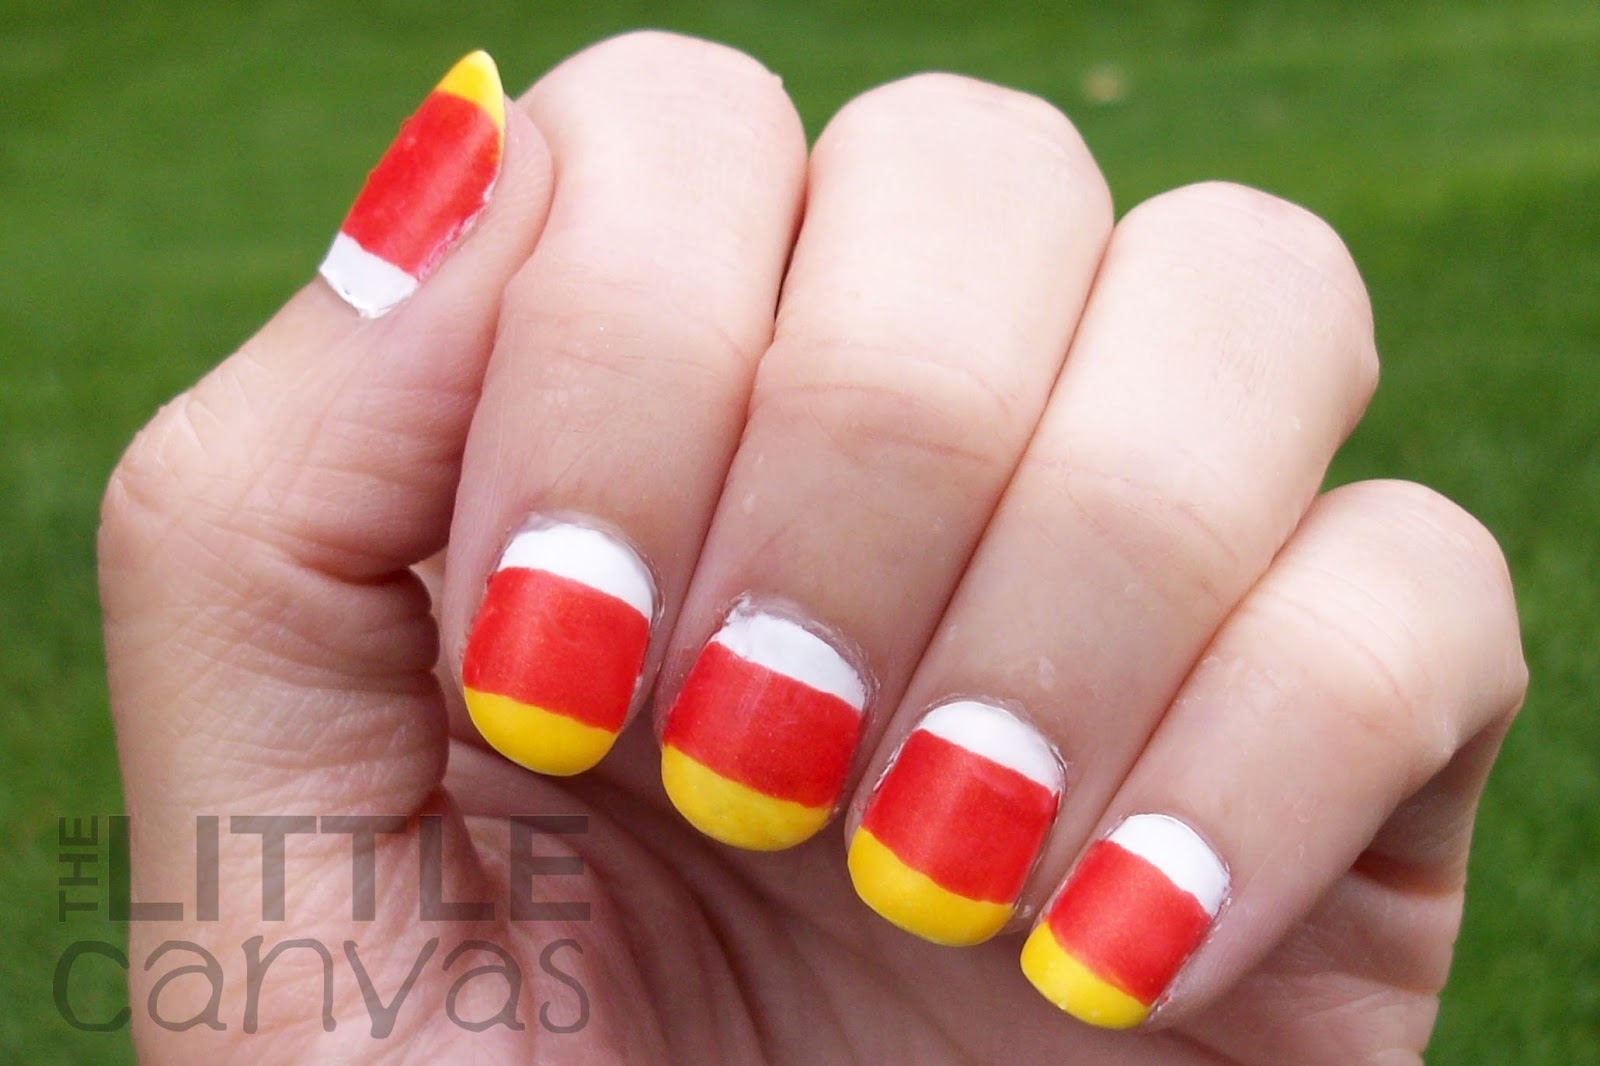 3. "Candy Corn Nail Designs" - wide 10